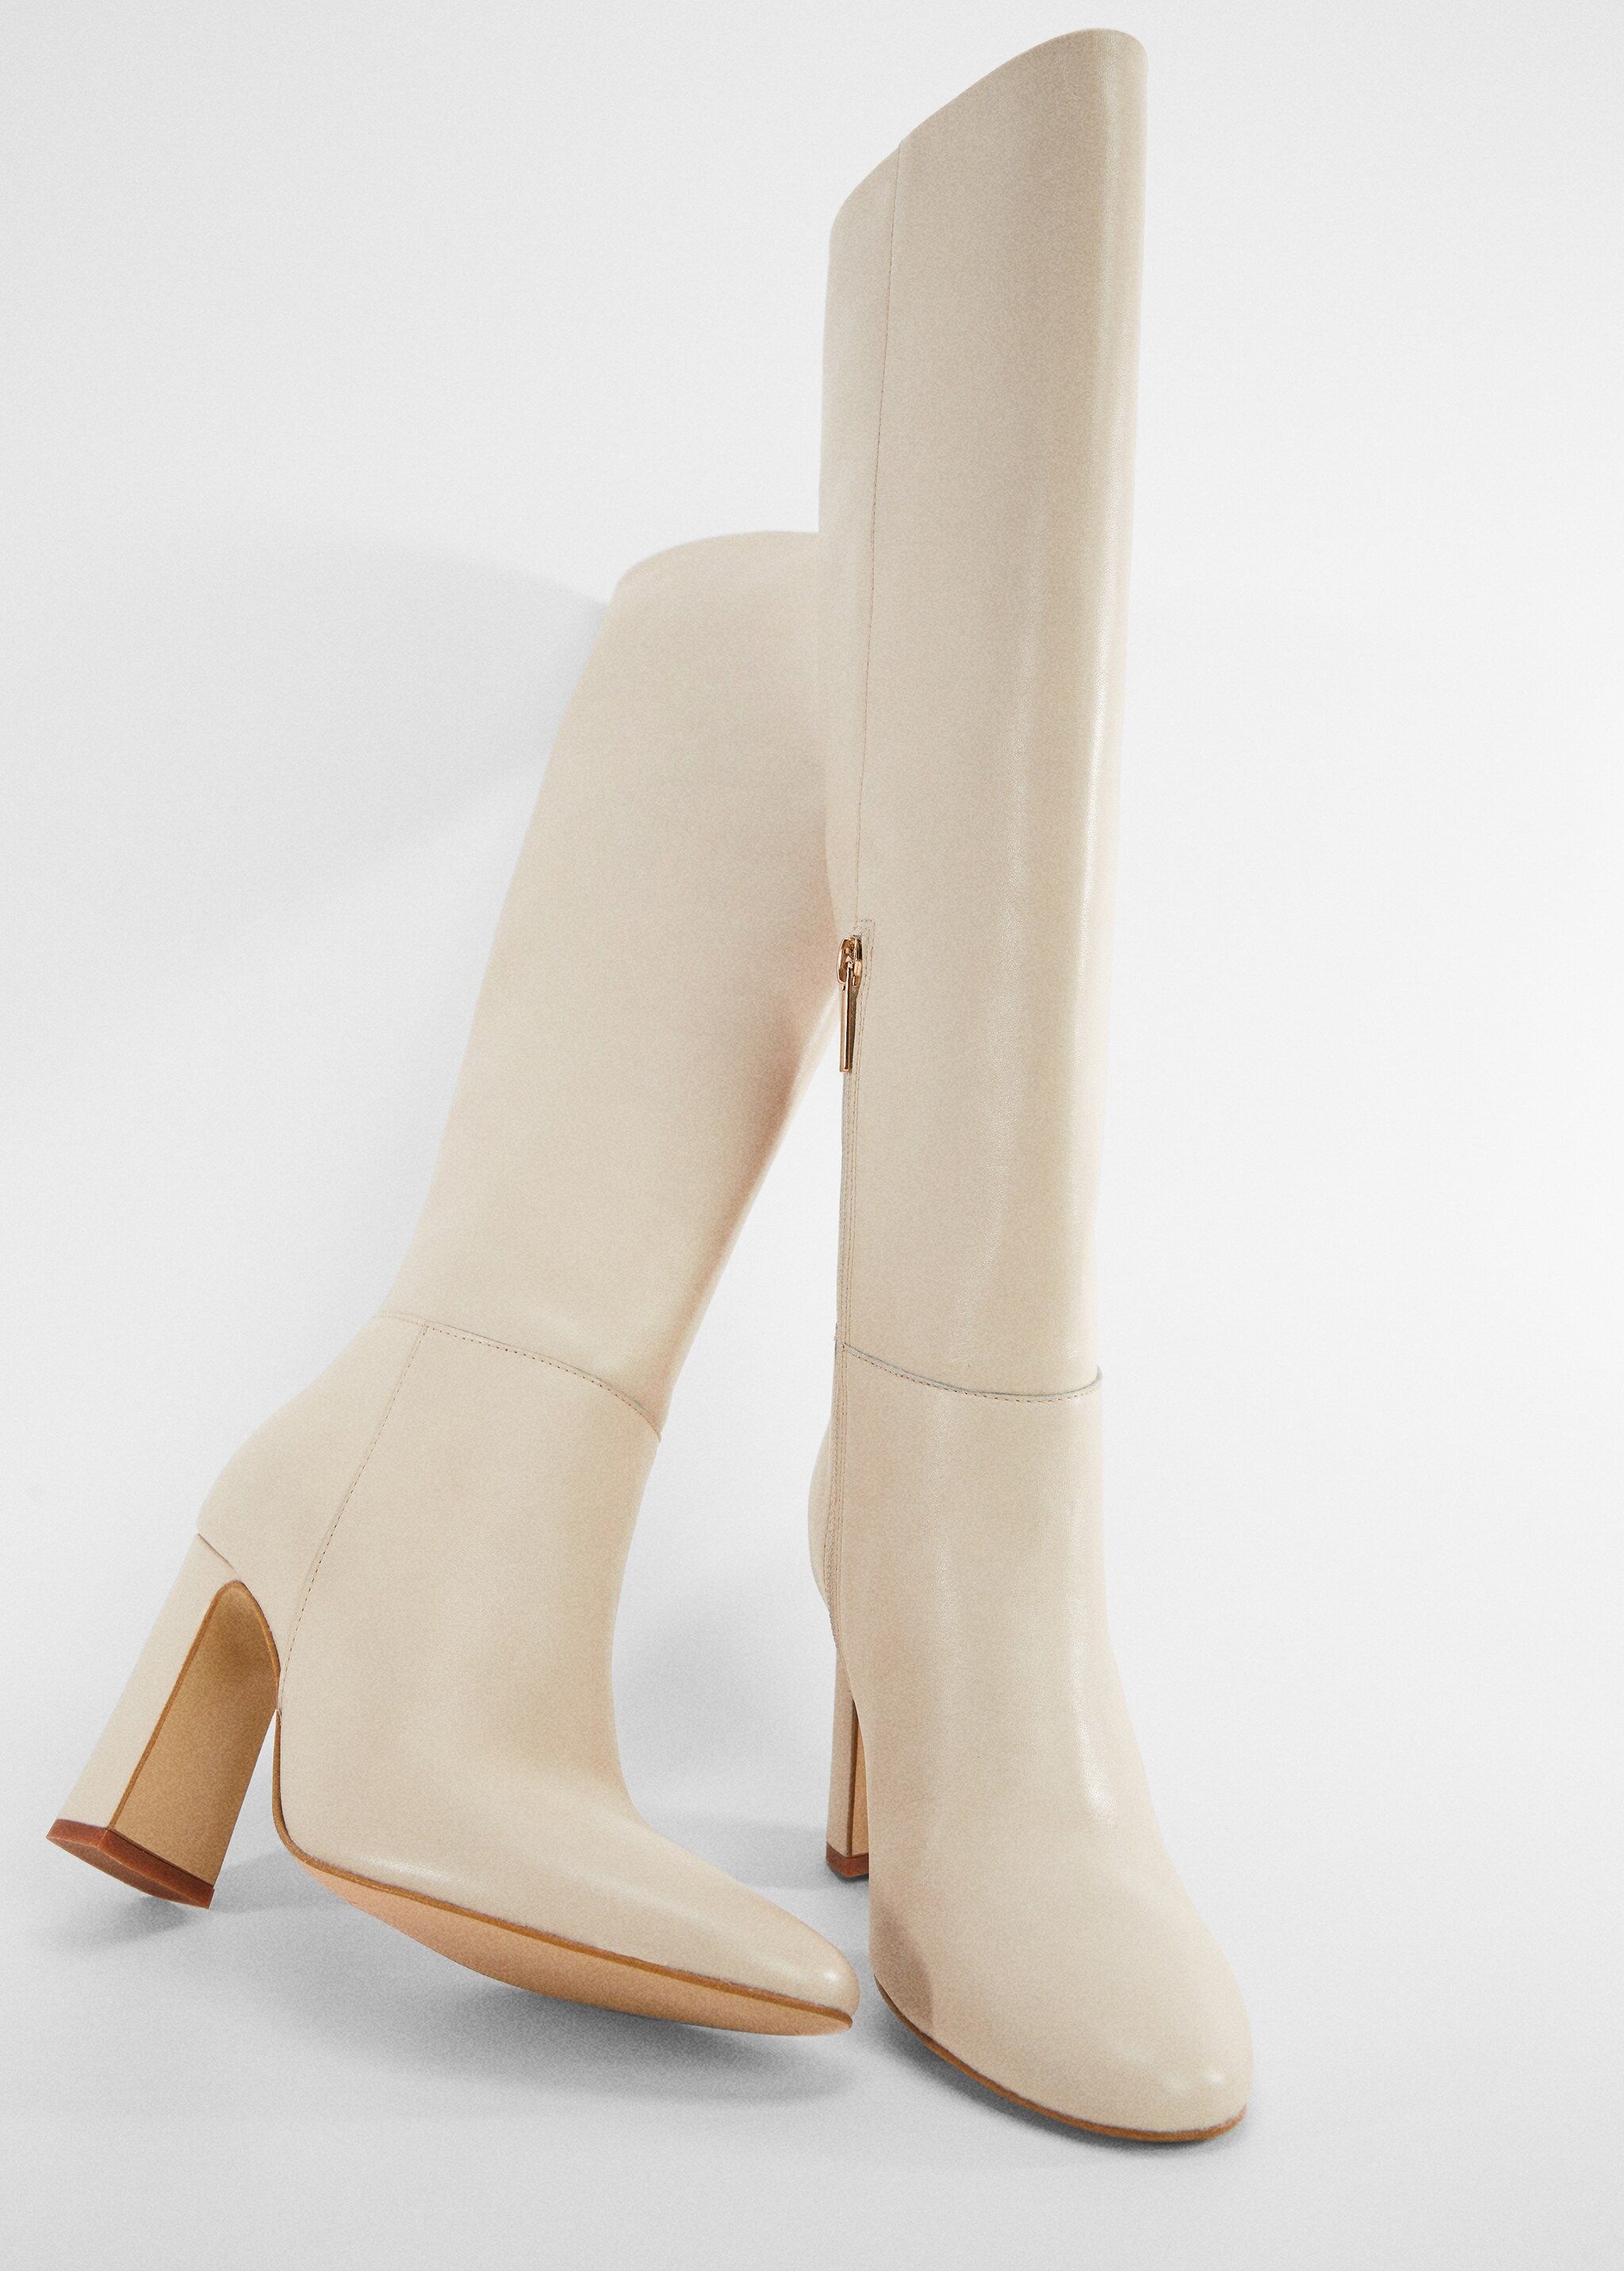 Leather boots with tall leg - Details of the article 5